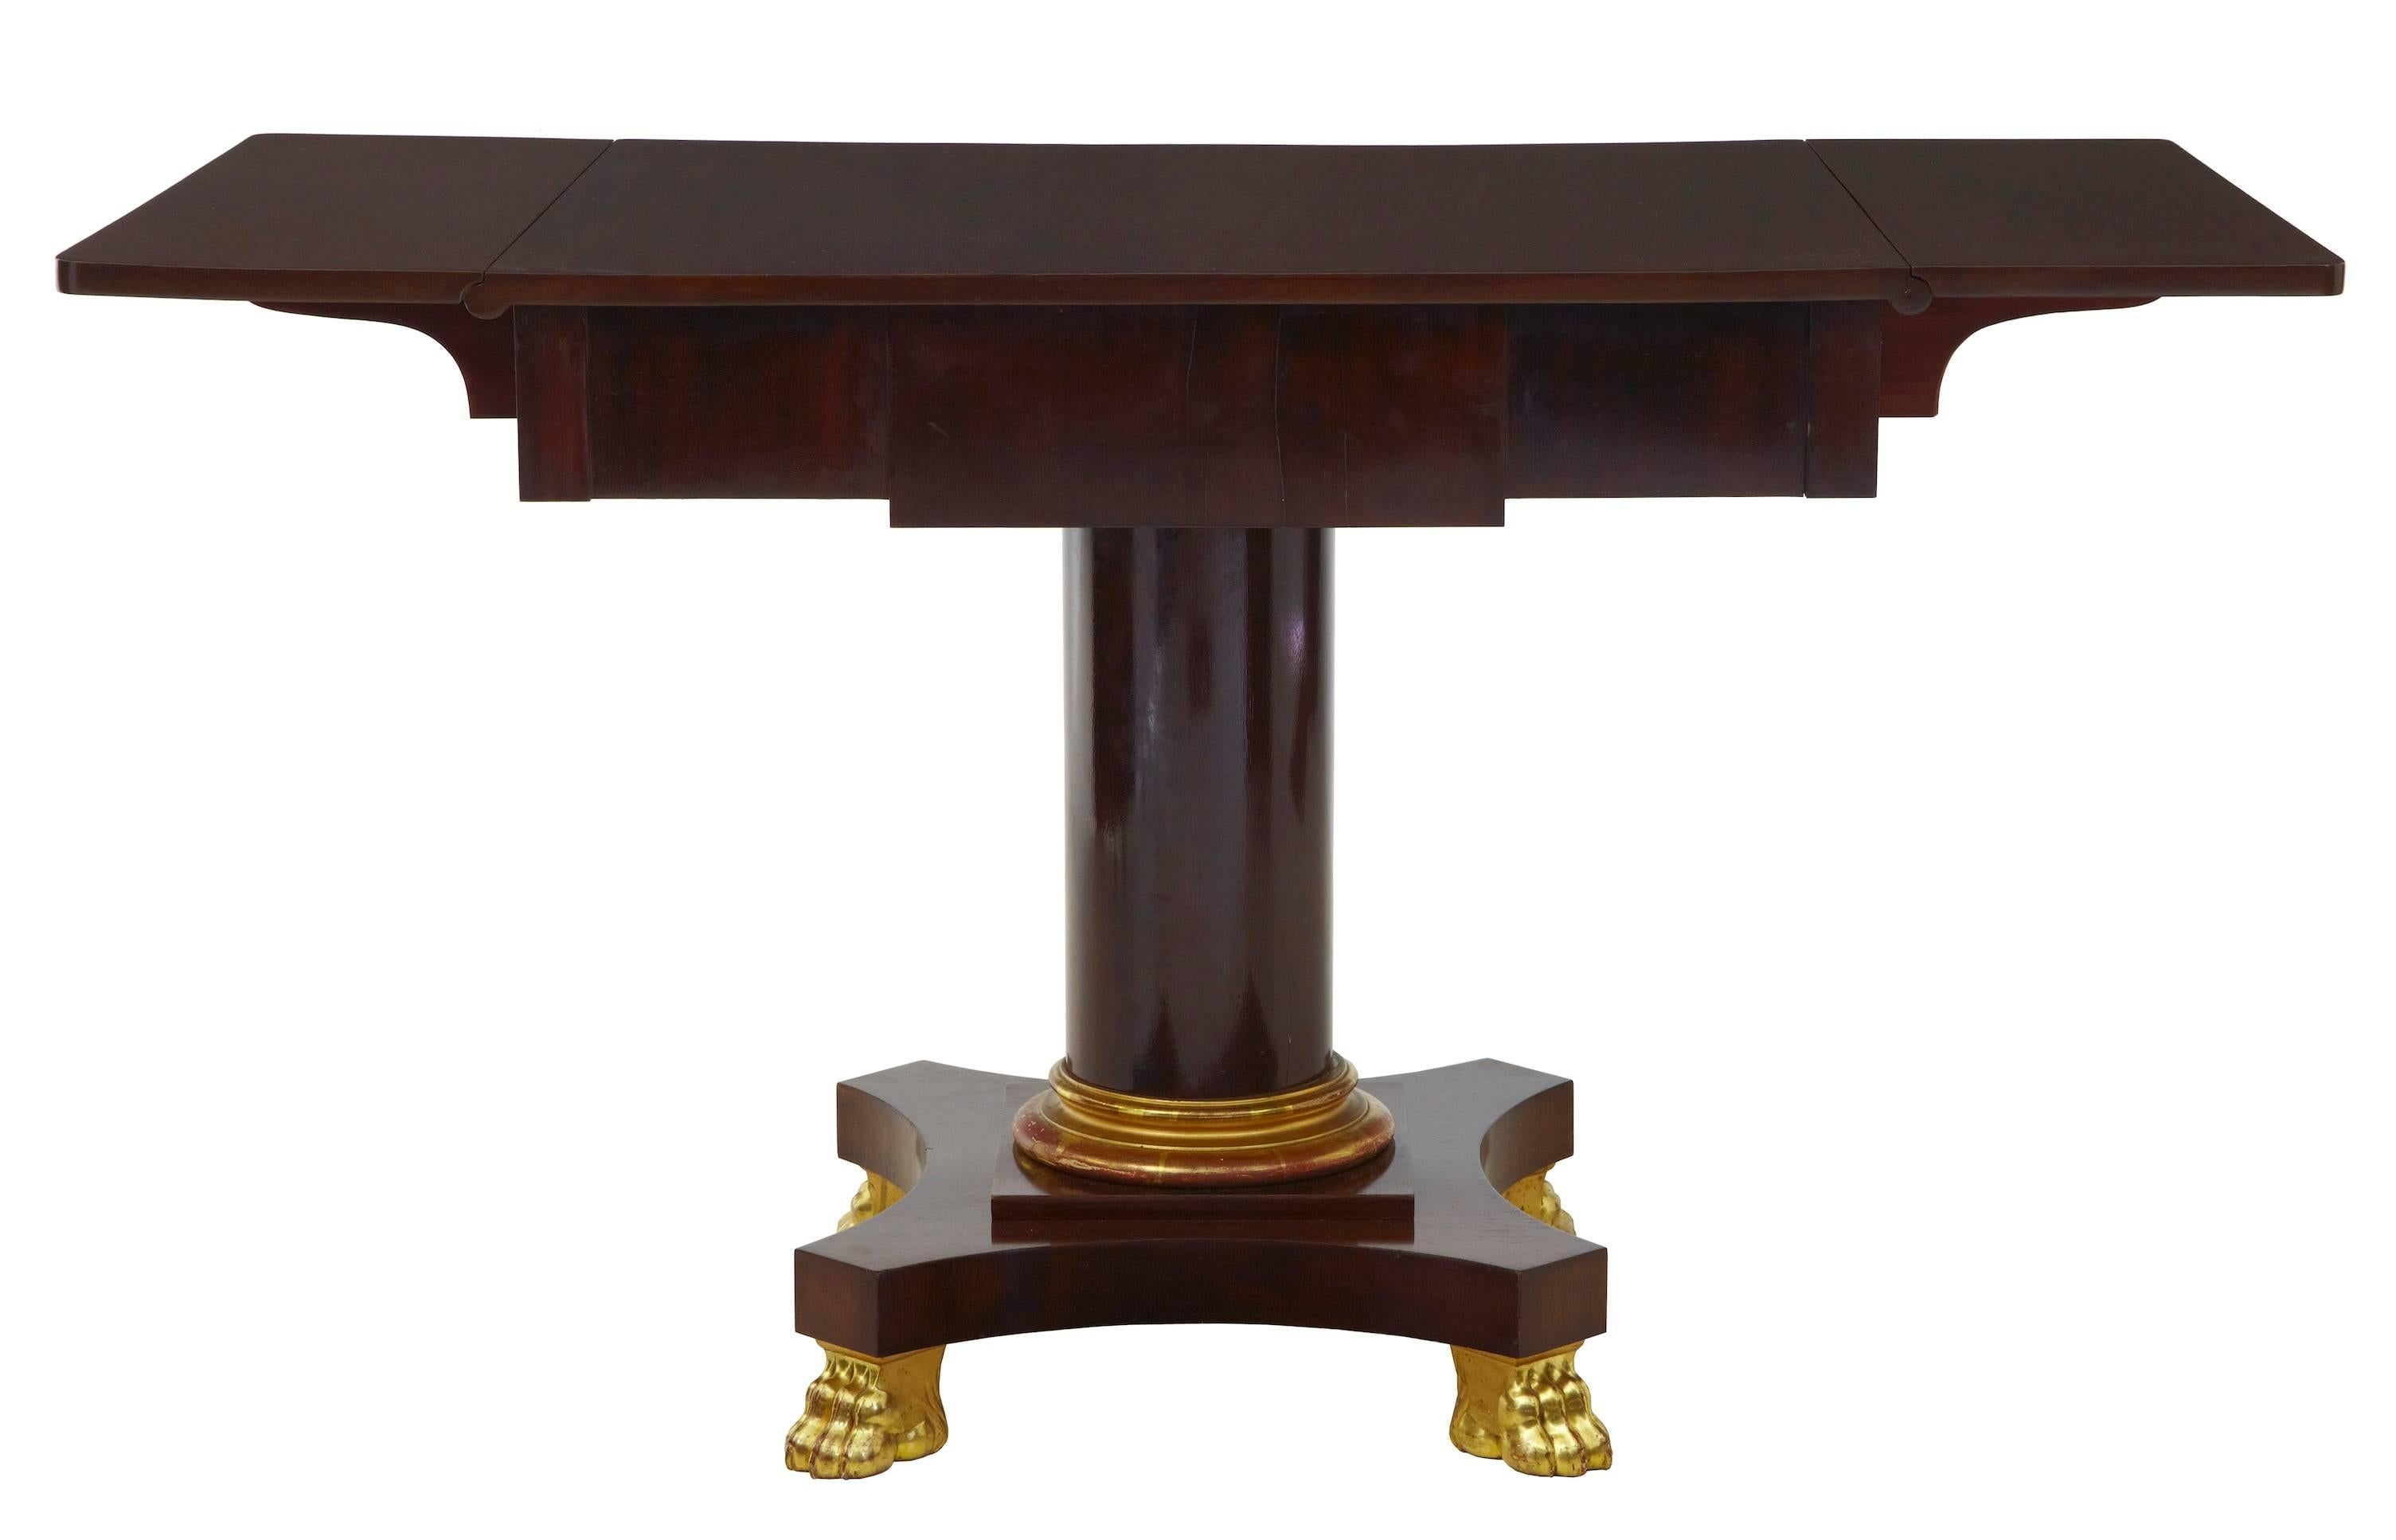 Woodwork Early 20th Century Mahogany and Gilt Sofa Table in the Empire Taste